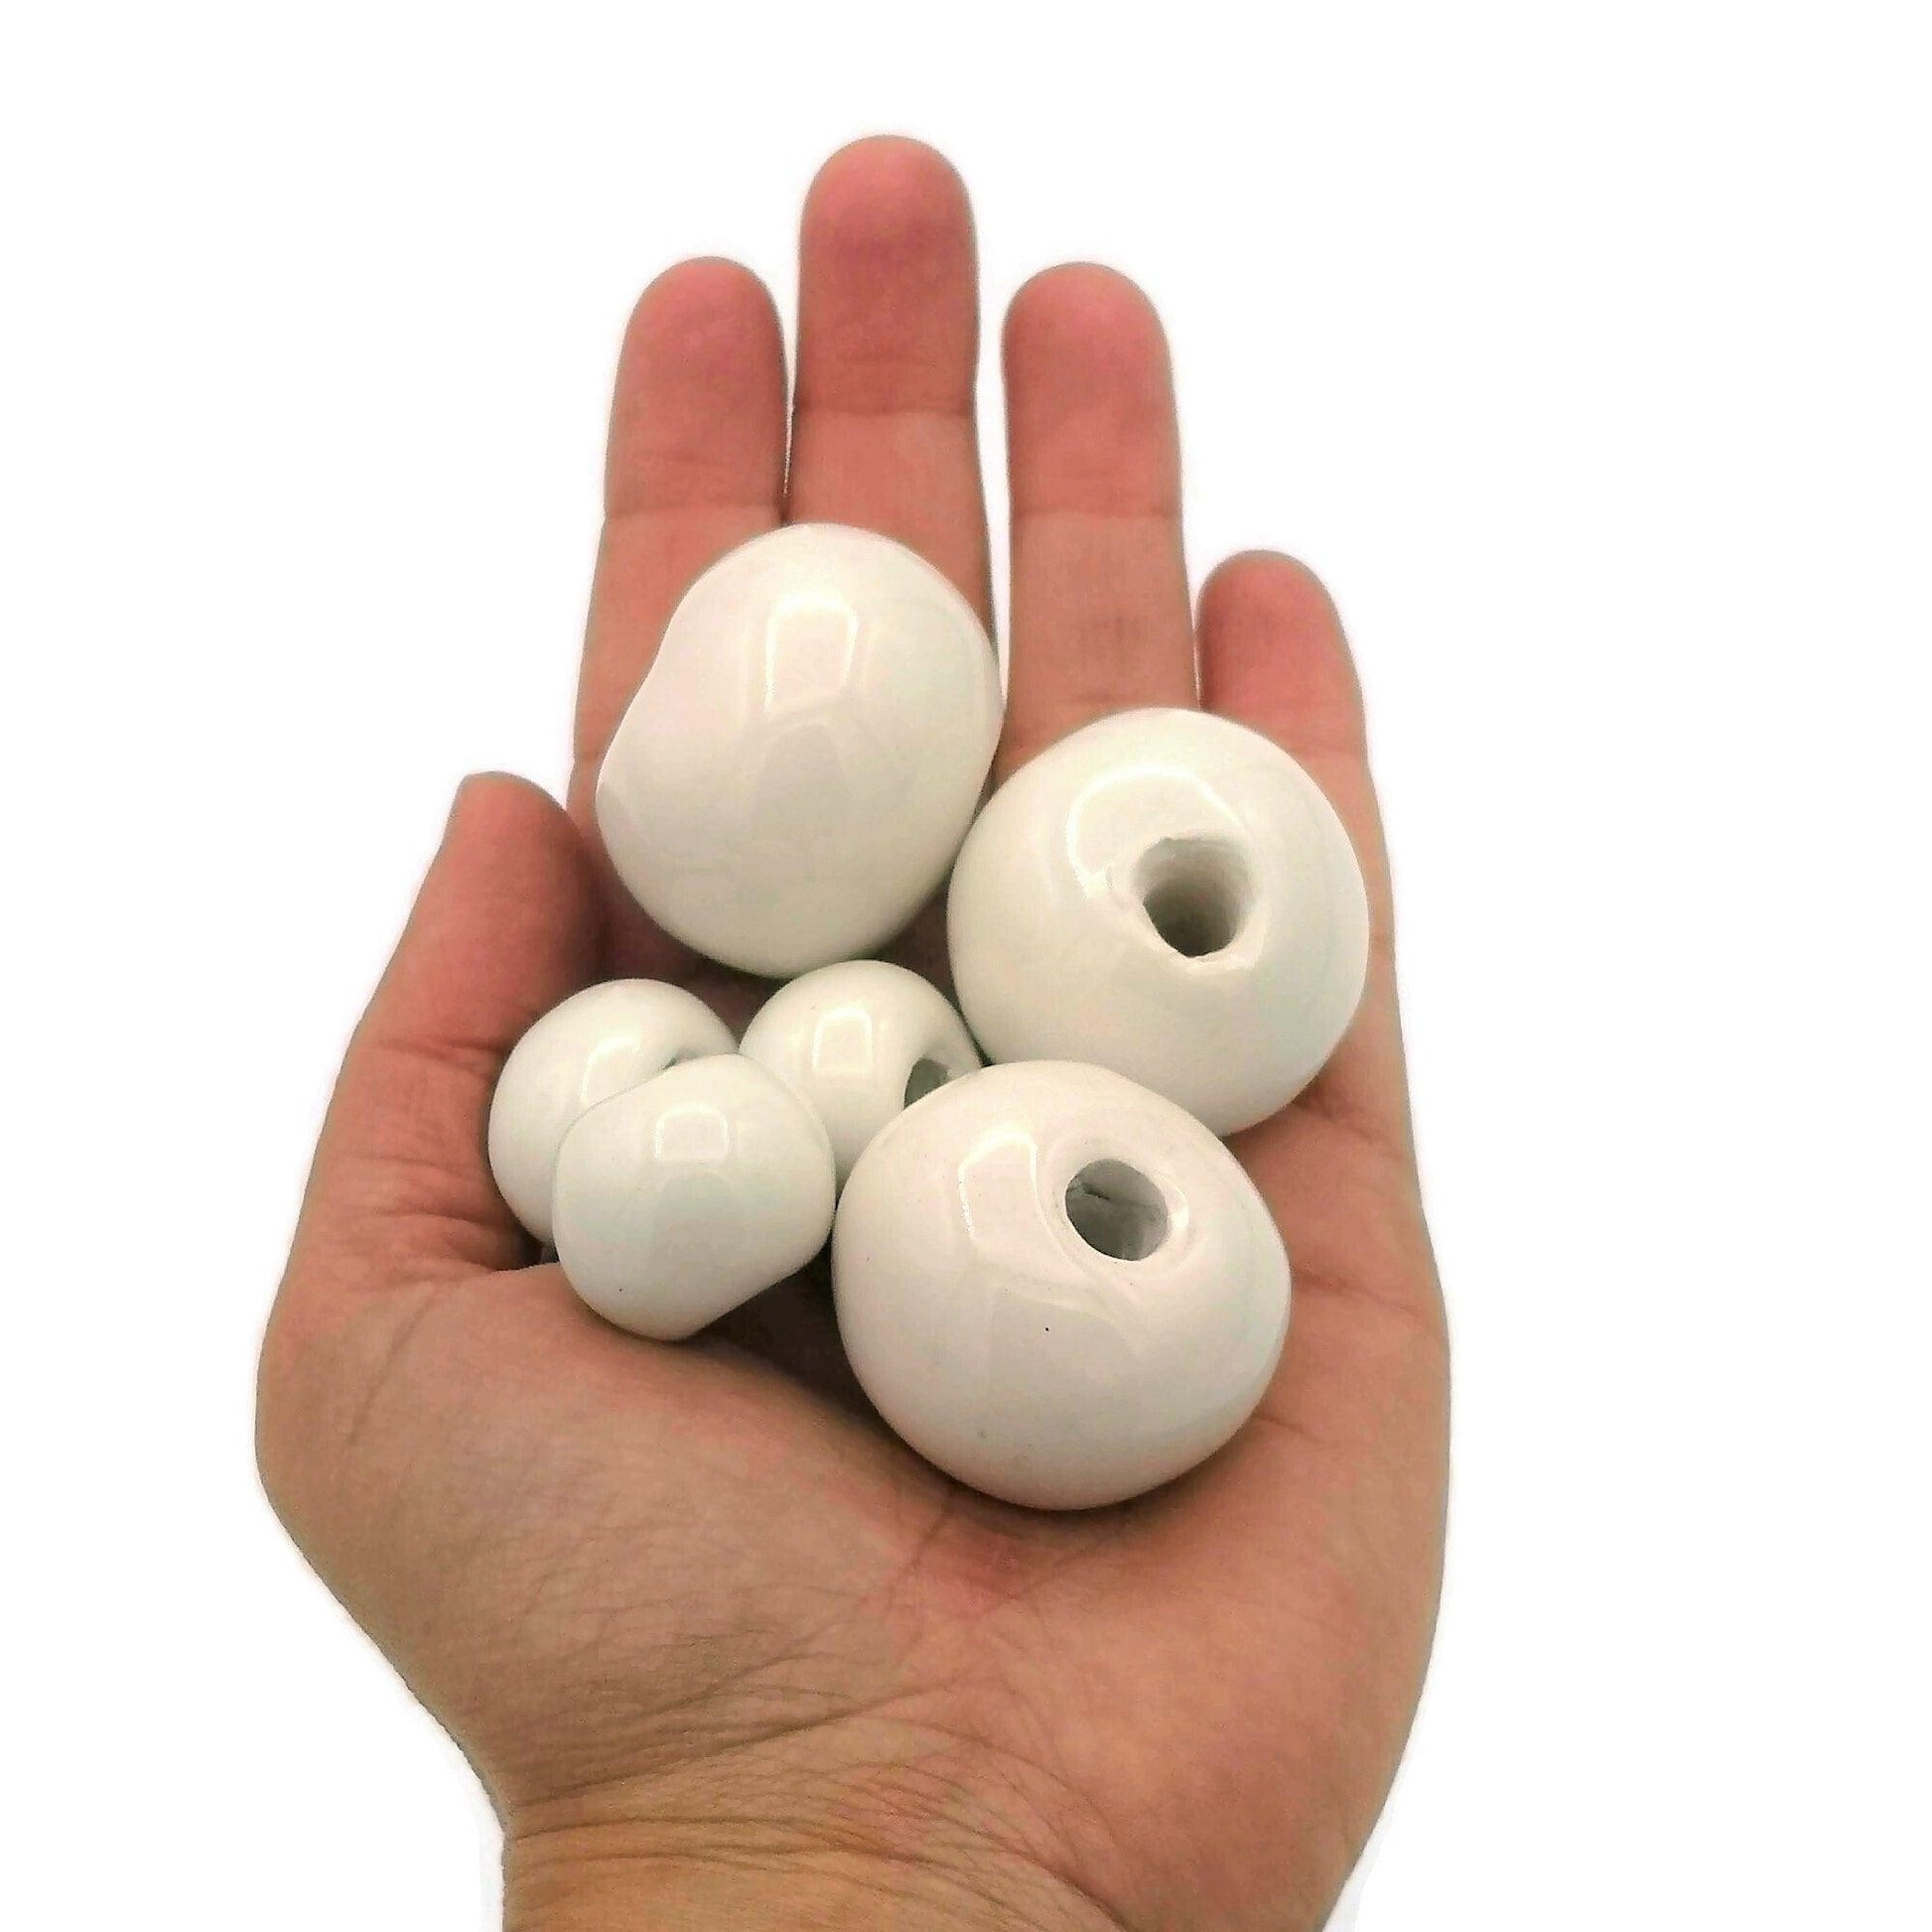 1pc 30/25/20mm Handmade Ceramic Extra Large Macrame Beads With Large Holes  7mm Round Clay Beads for Unique Jewelry Making Bubblegum Style -   Australia